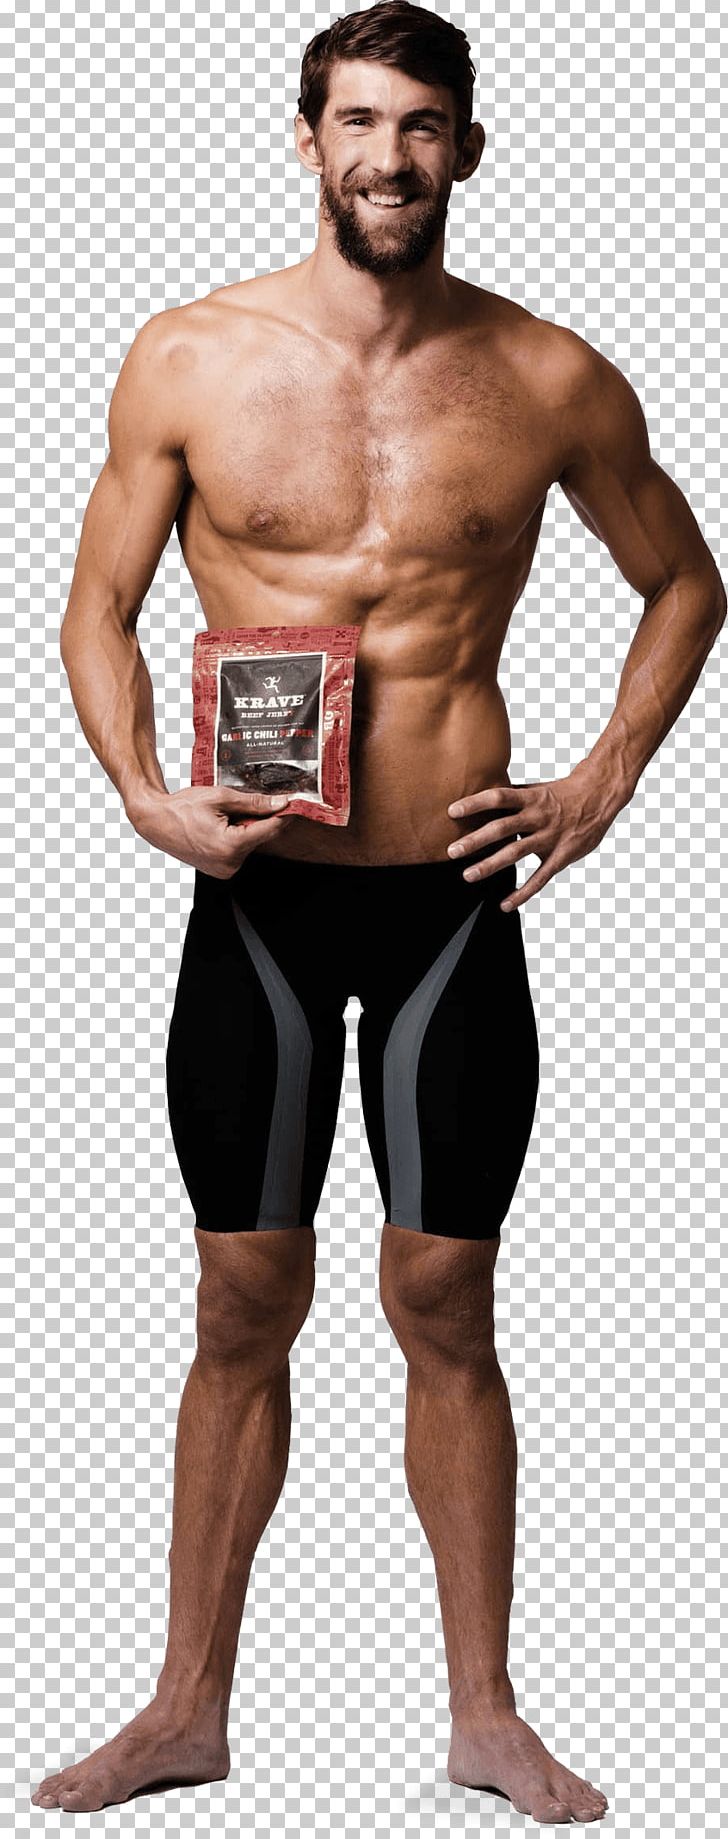 Michael Phelps Athlete Male Krave Jerky Physical Fitness PNG, Clipart, Abdomen, Active Undergarment, Arm, Bodybuilder, Boxing Glove Free PNG Download